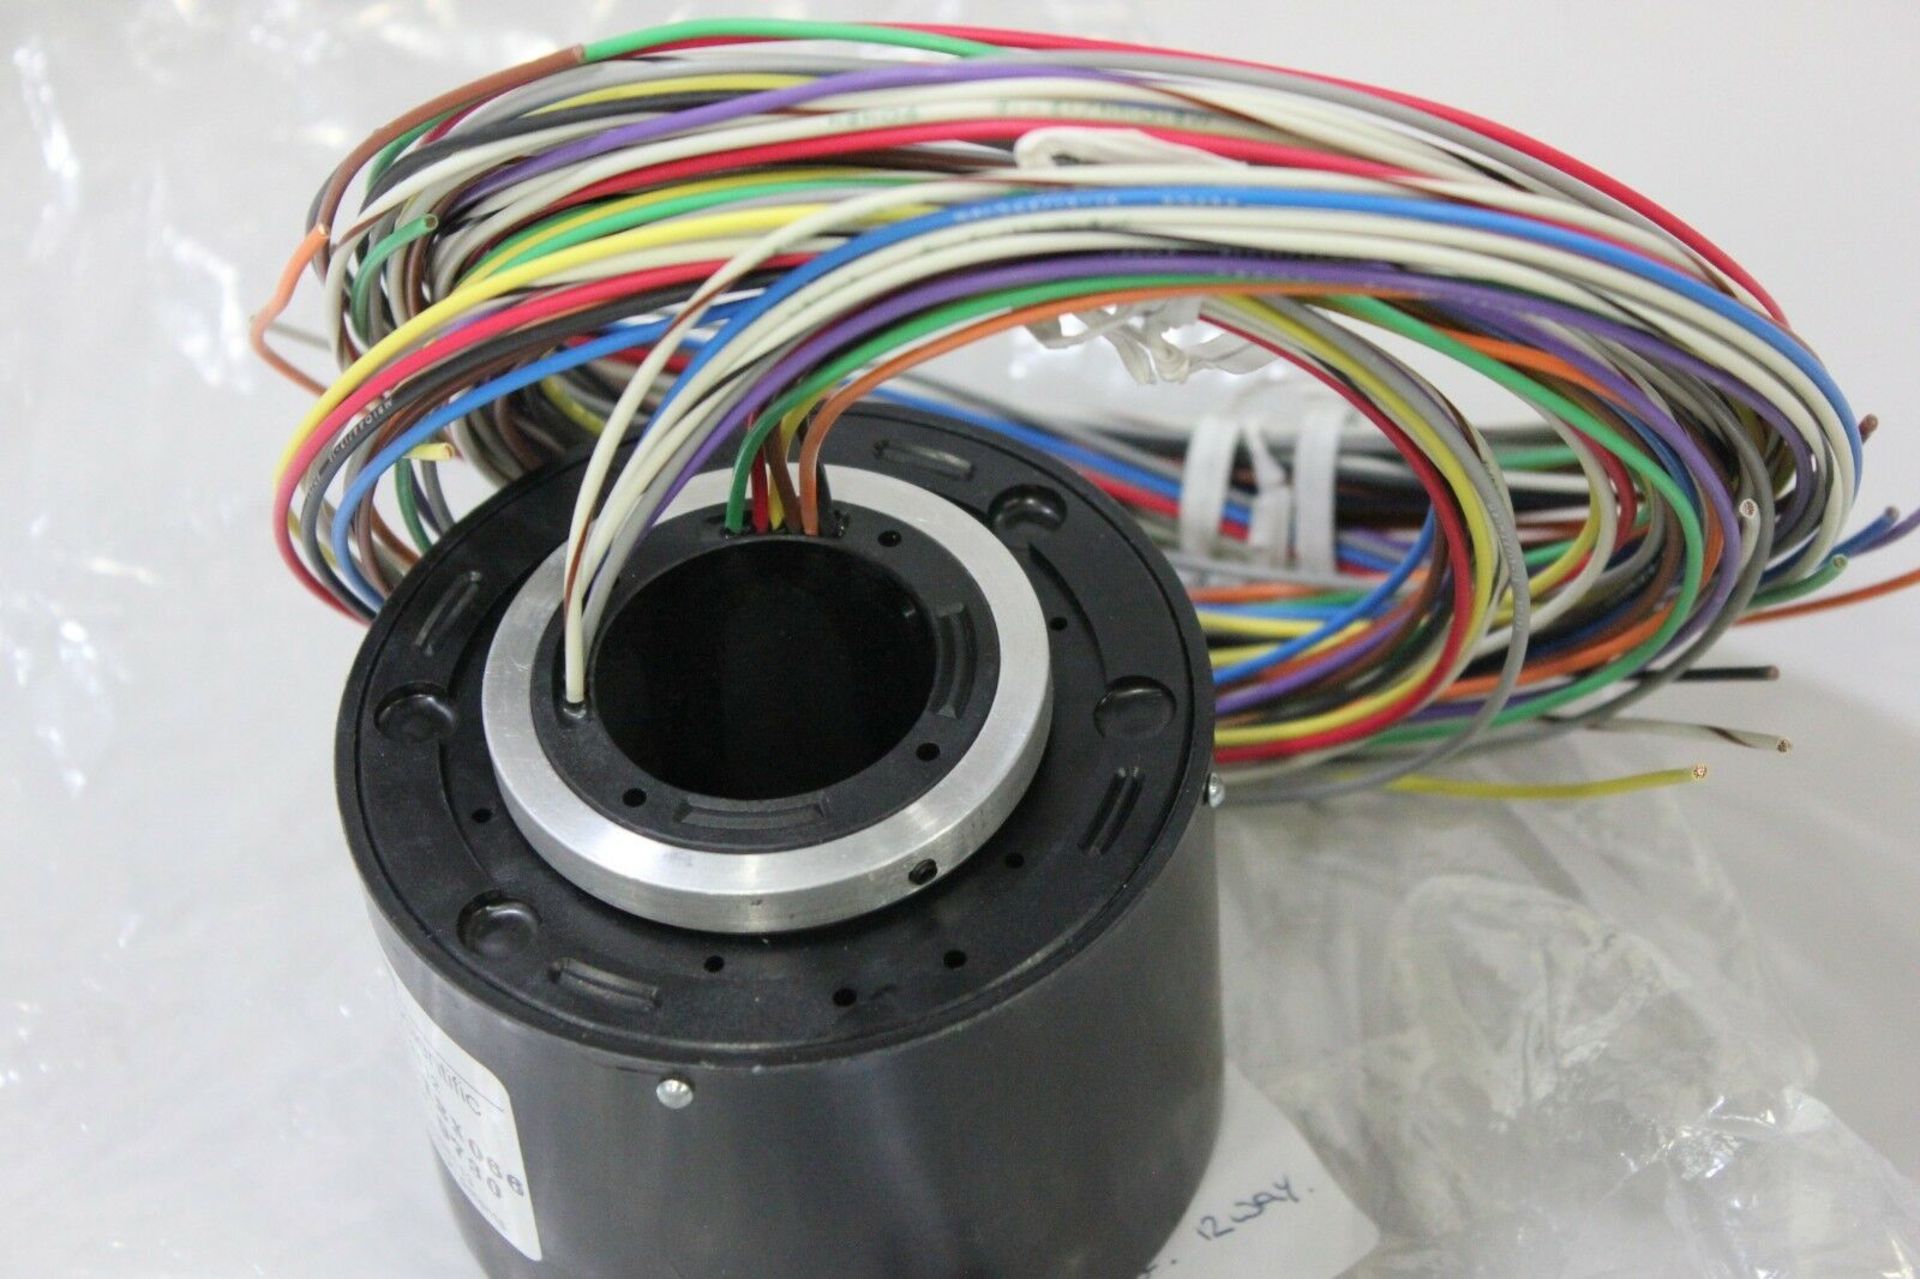 New Litton Poly Scientific 12 Way Slip Ring Slipring Assembly - Image 2 of 4